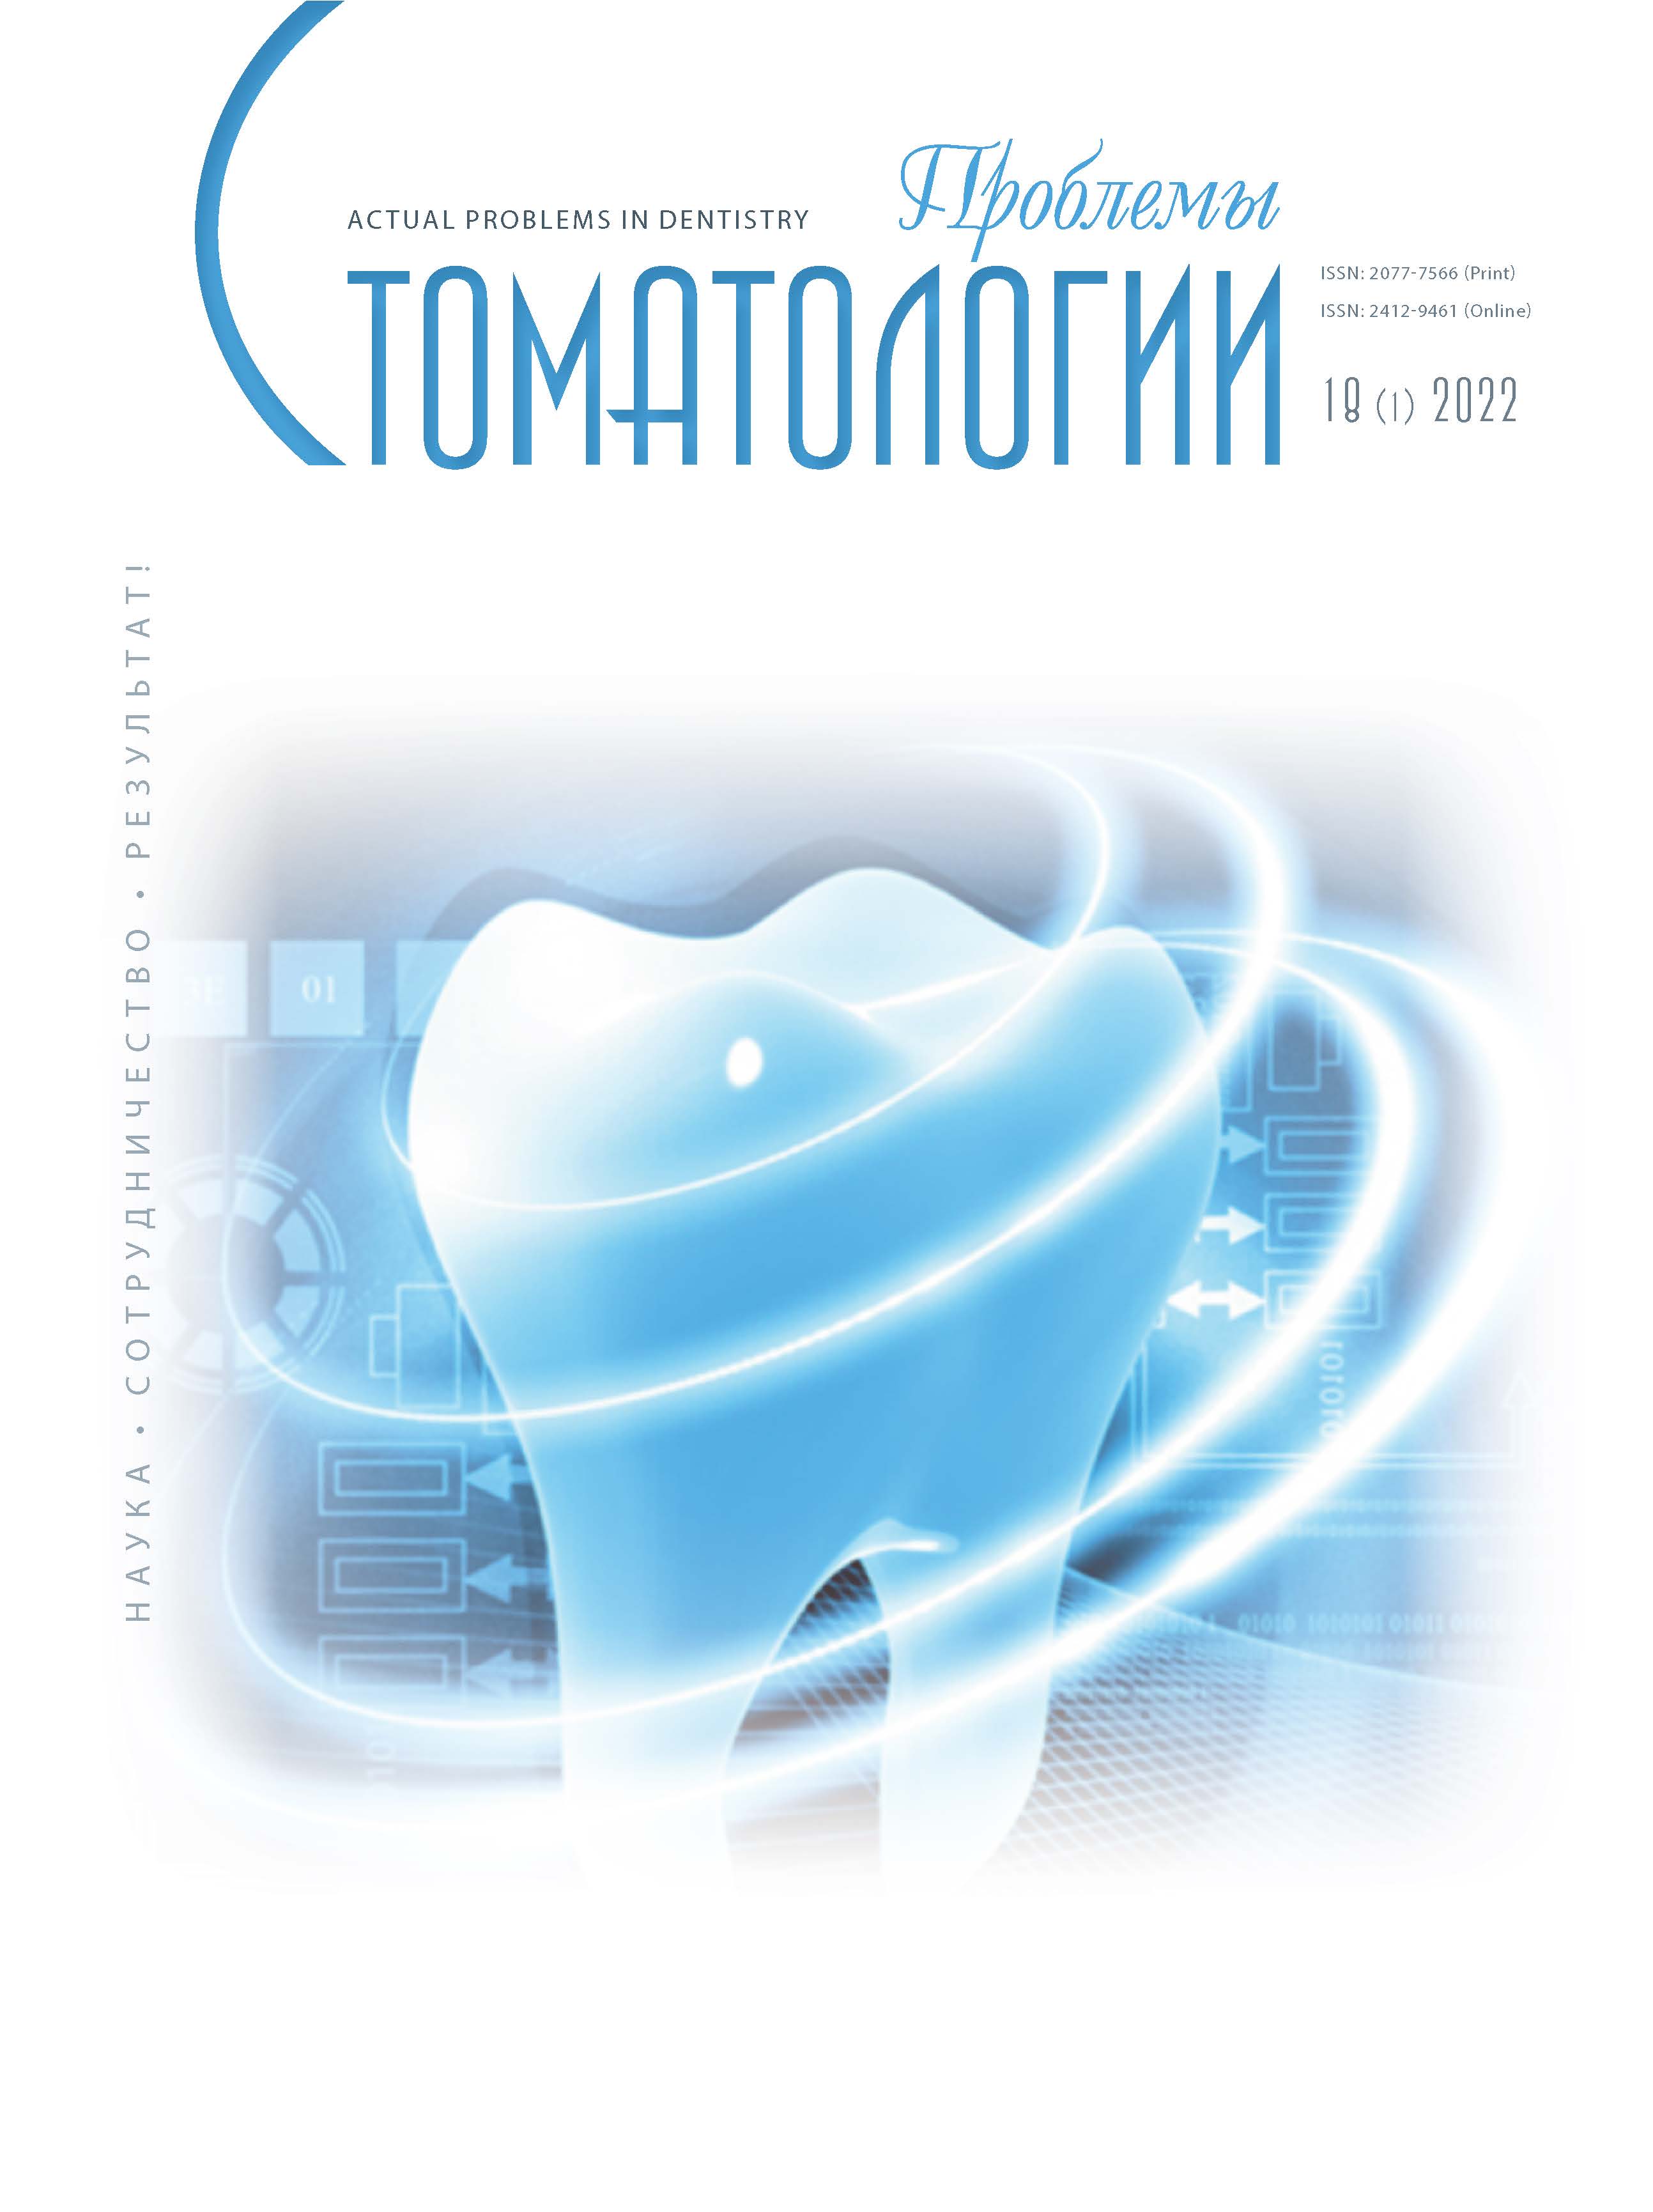                         THE PREVALENCE OF DENTAL DISEASES AND FEATURES OF HEMATOLOGICAL PARAMETERS IN CANCER PATIENTS
            